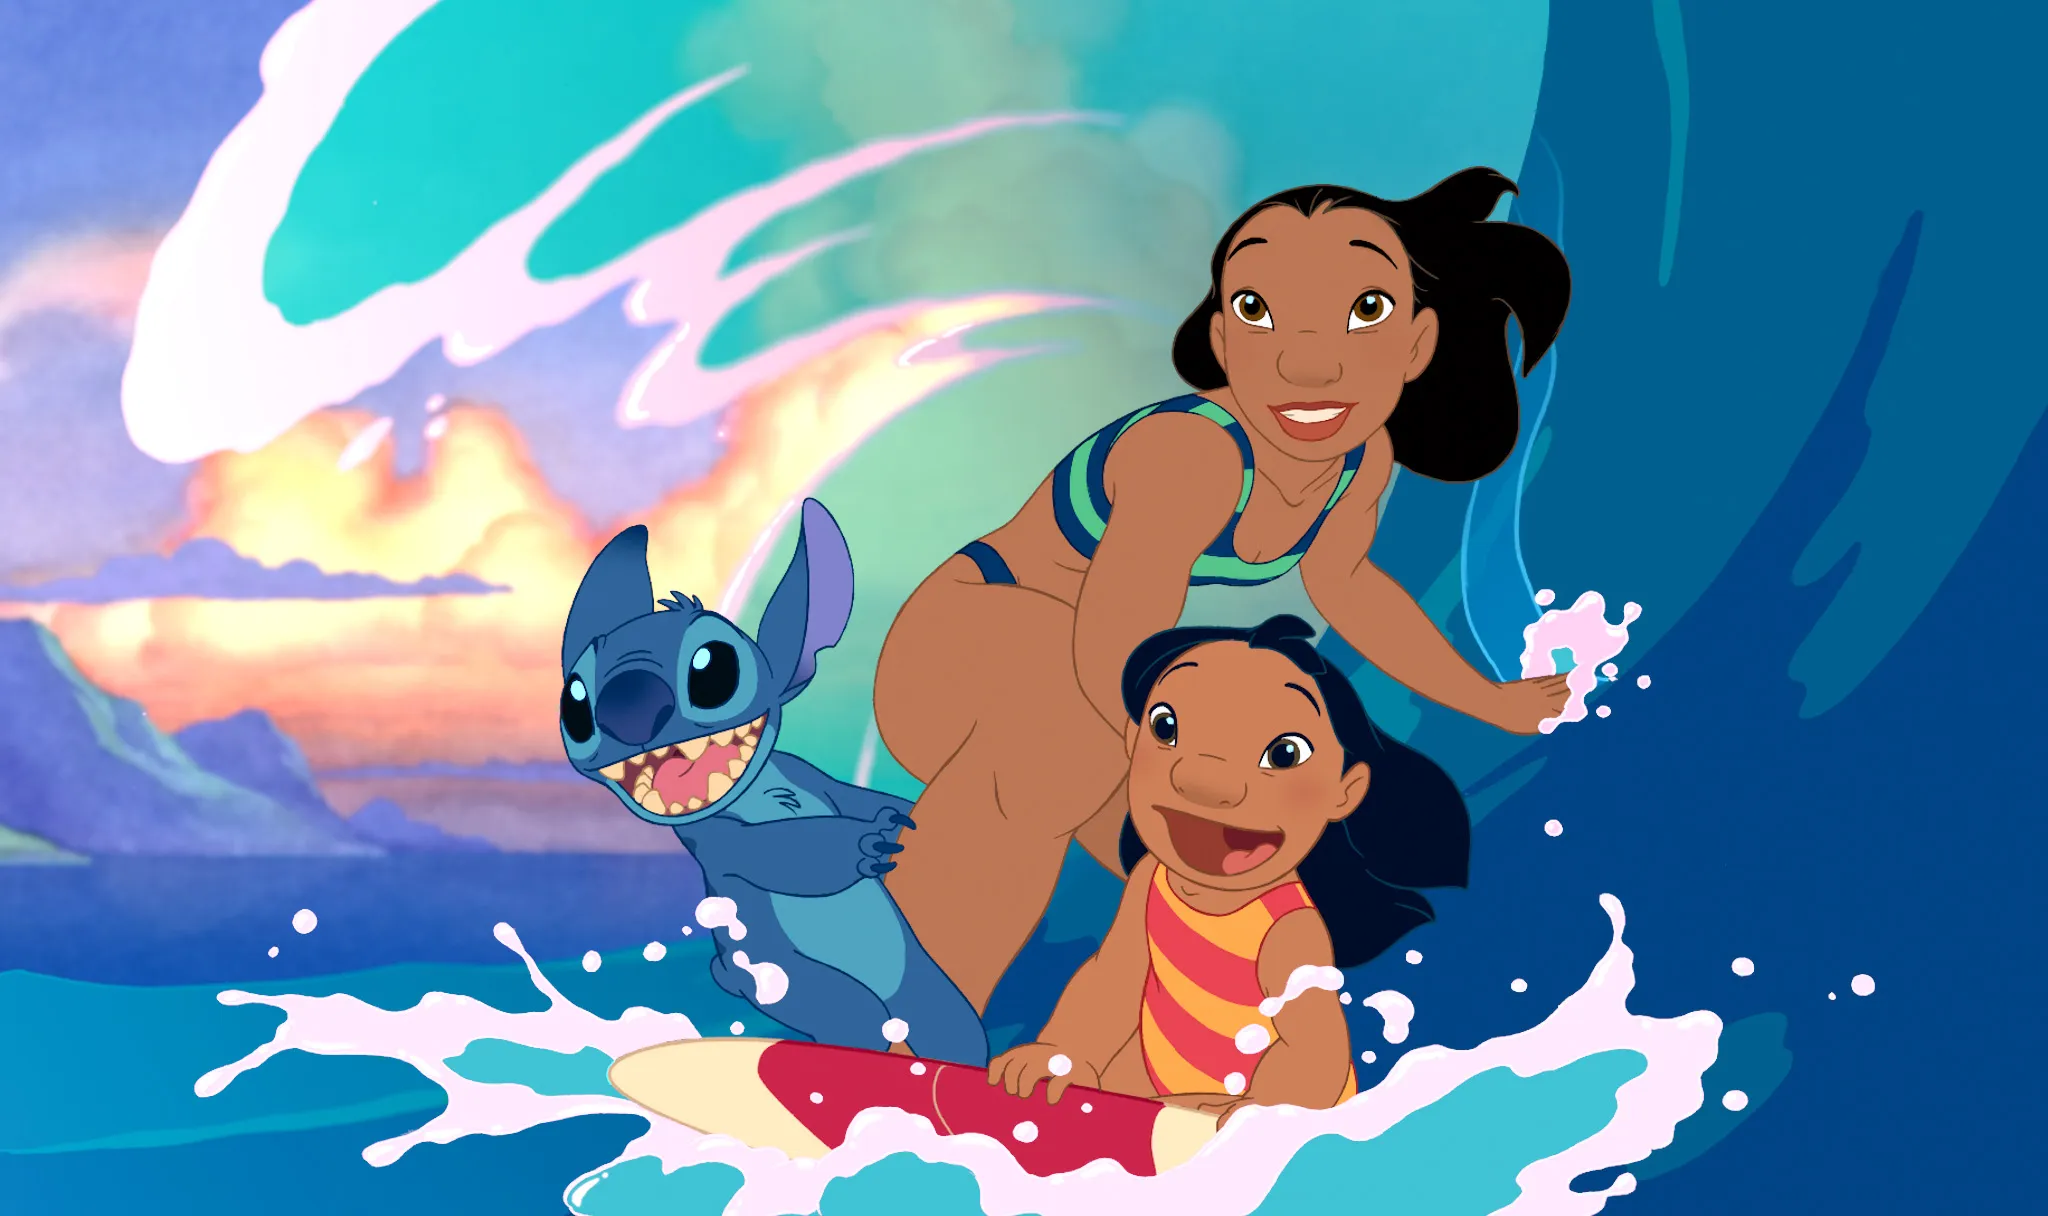 Chris Sanders Returning to Voice Stitch in Live-Action ‘Lilo & Stitch’; Nani Voice Actress Tia Carrere Playing New Character